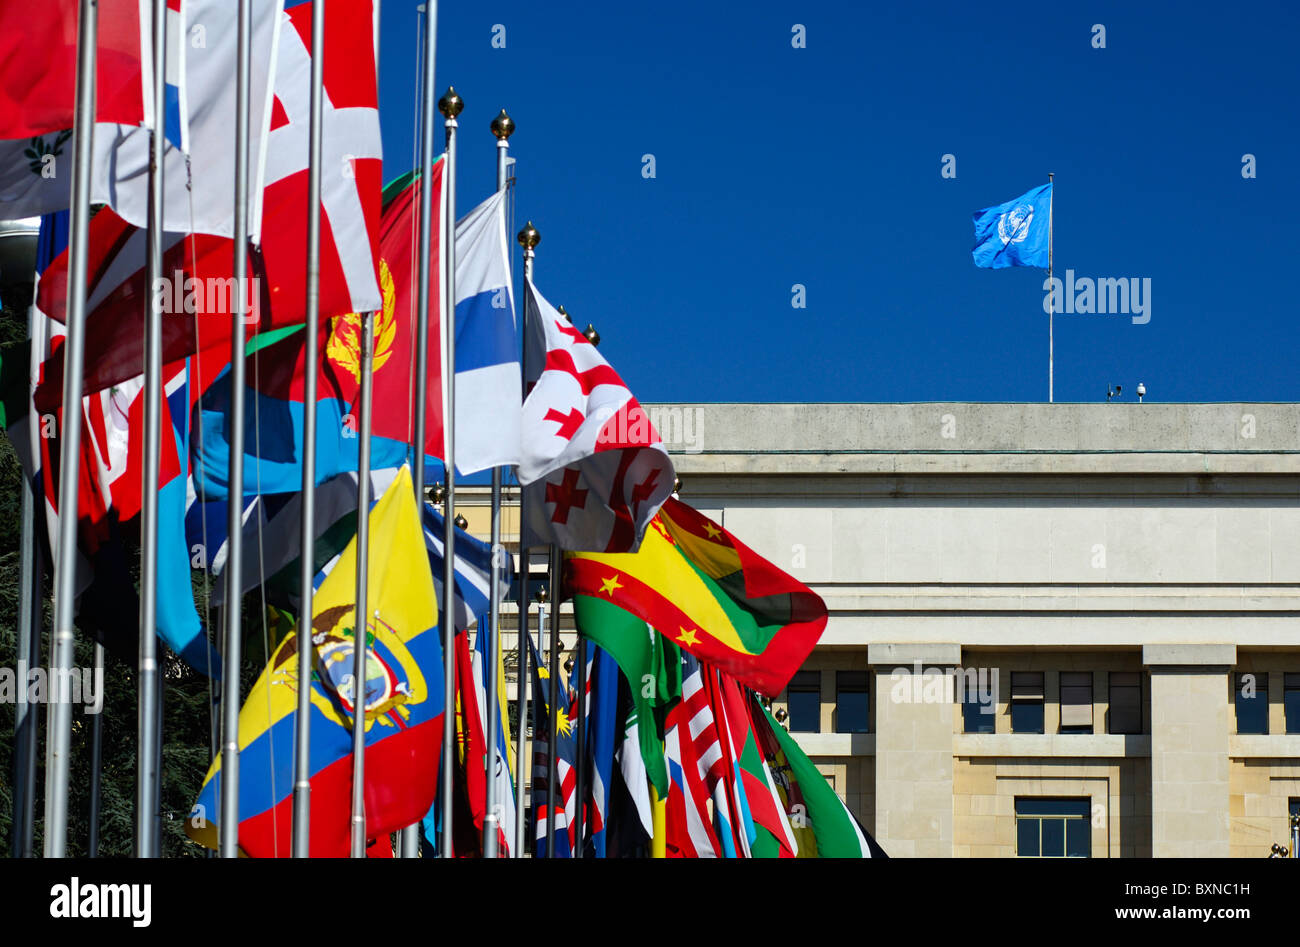 The blue United Nations flag and flags from all countries in the Court of Flags, United Nations,UN, Geneva, Switzerland Stock Photo